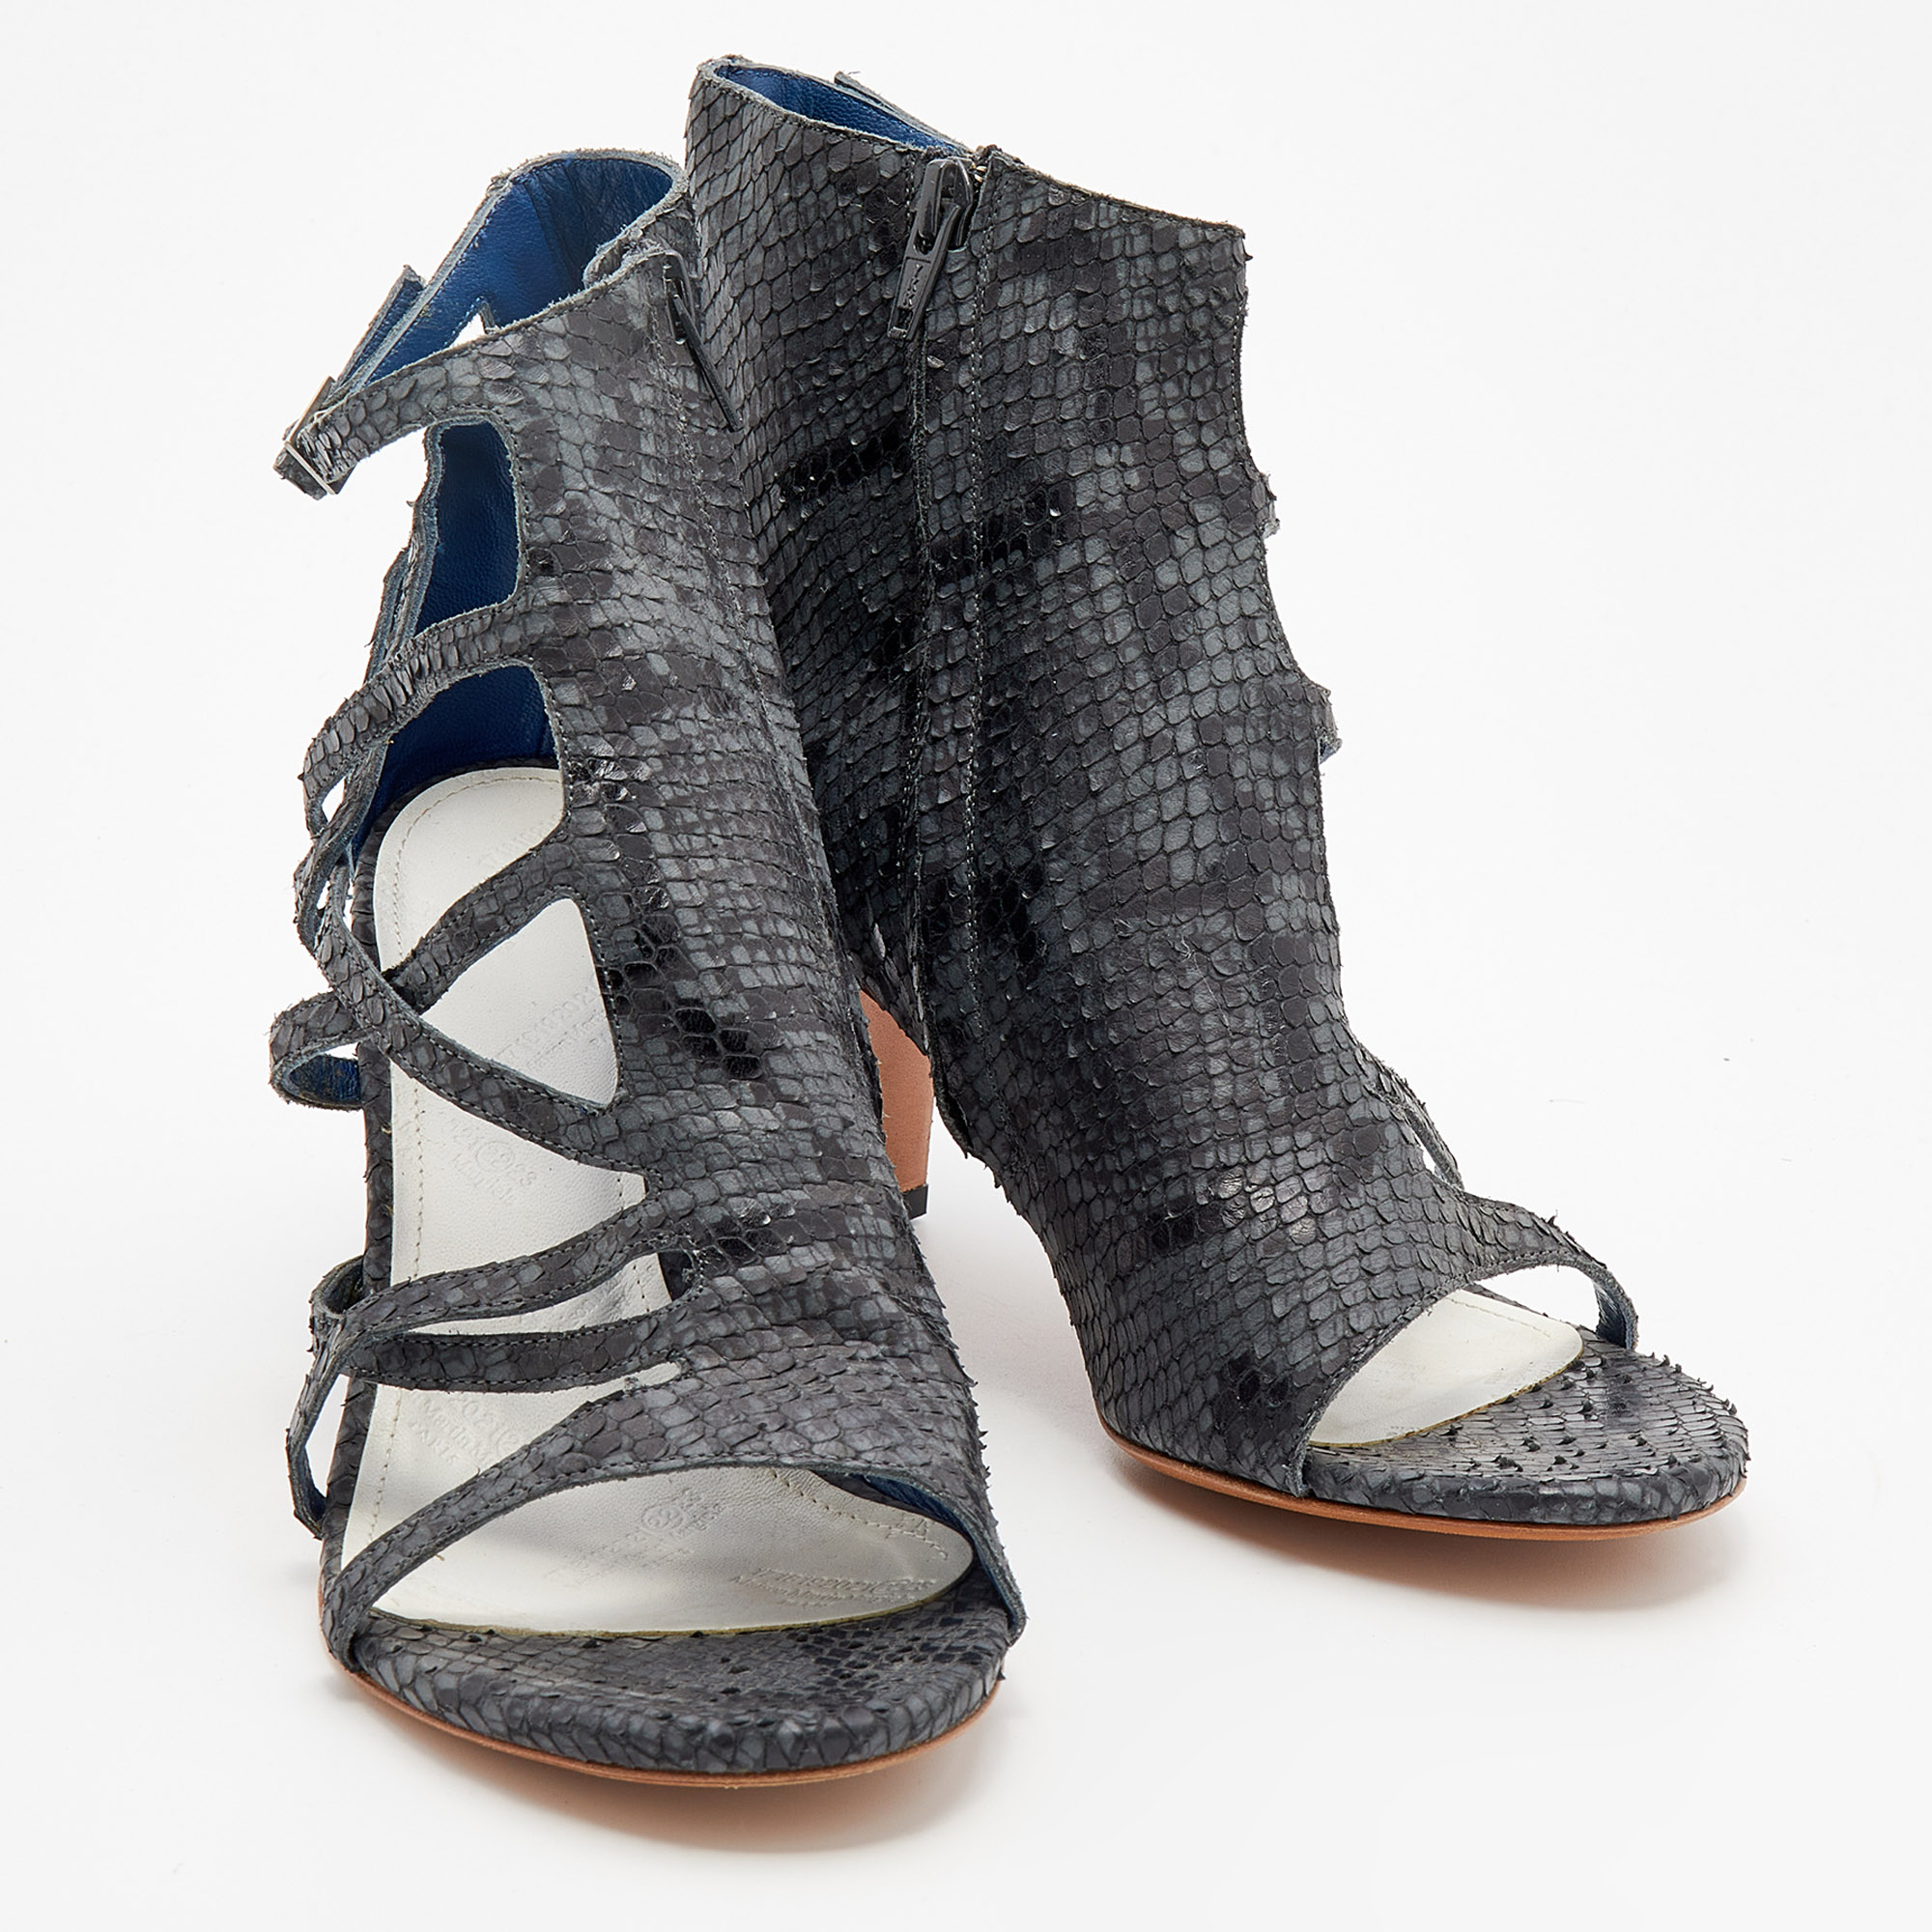 Maison Martin Margiela Grey/Black Python Embossed Leather Strappy Open Toe Booties Size 40